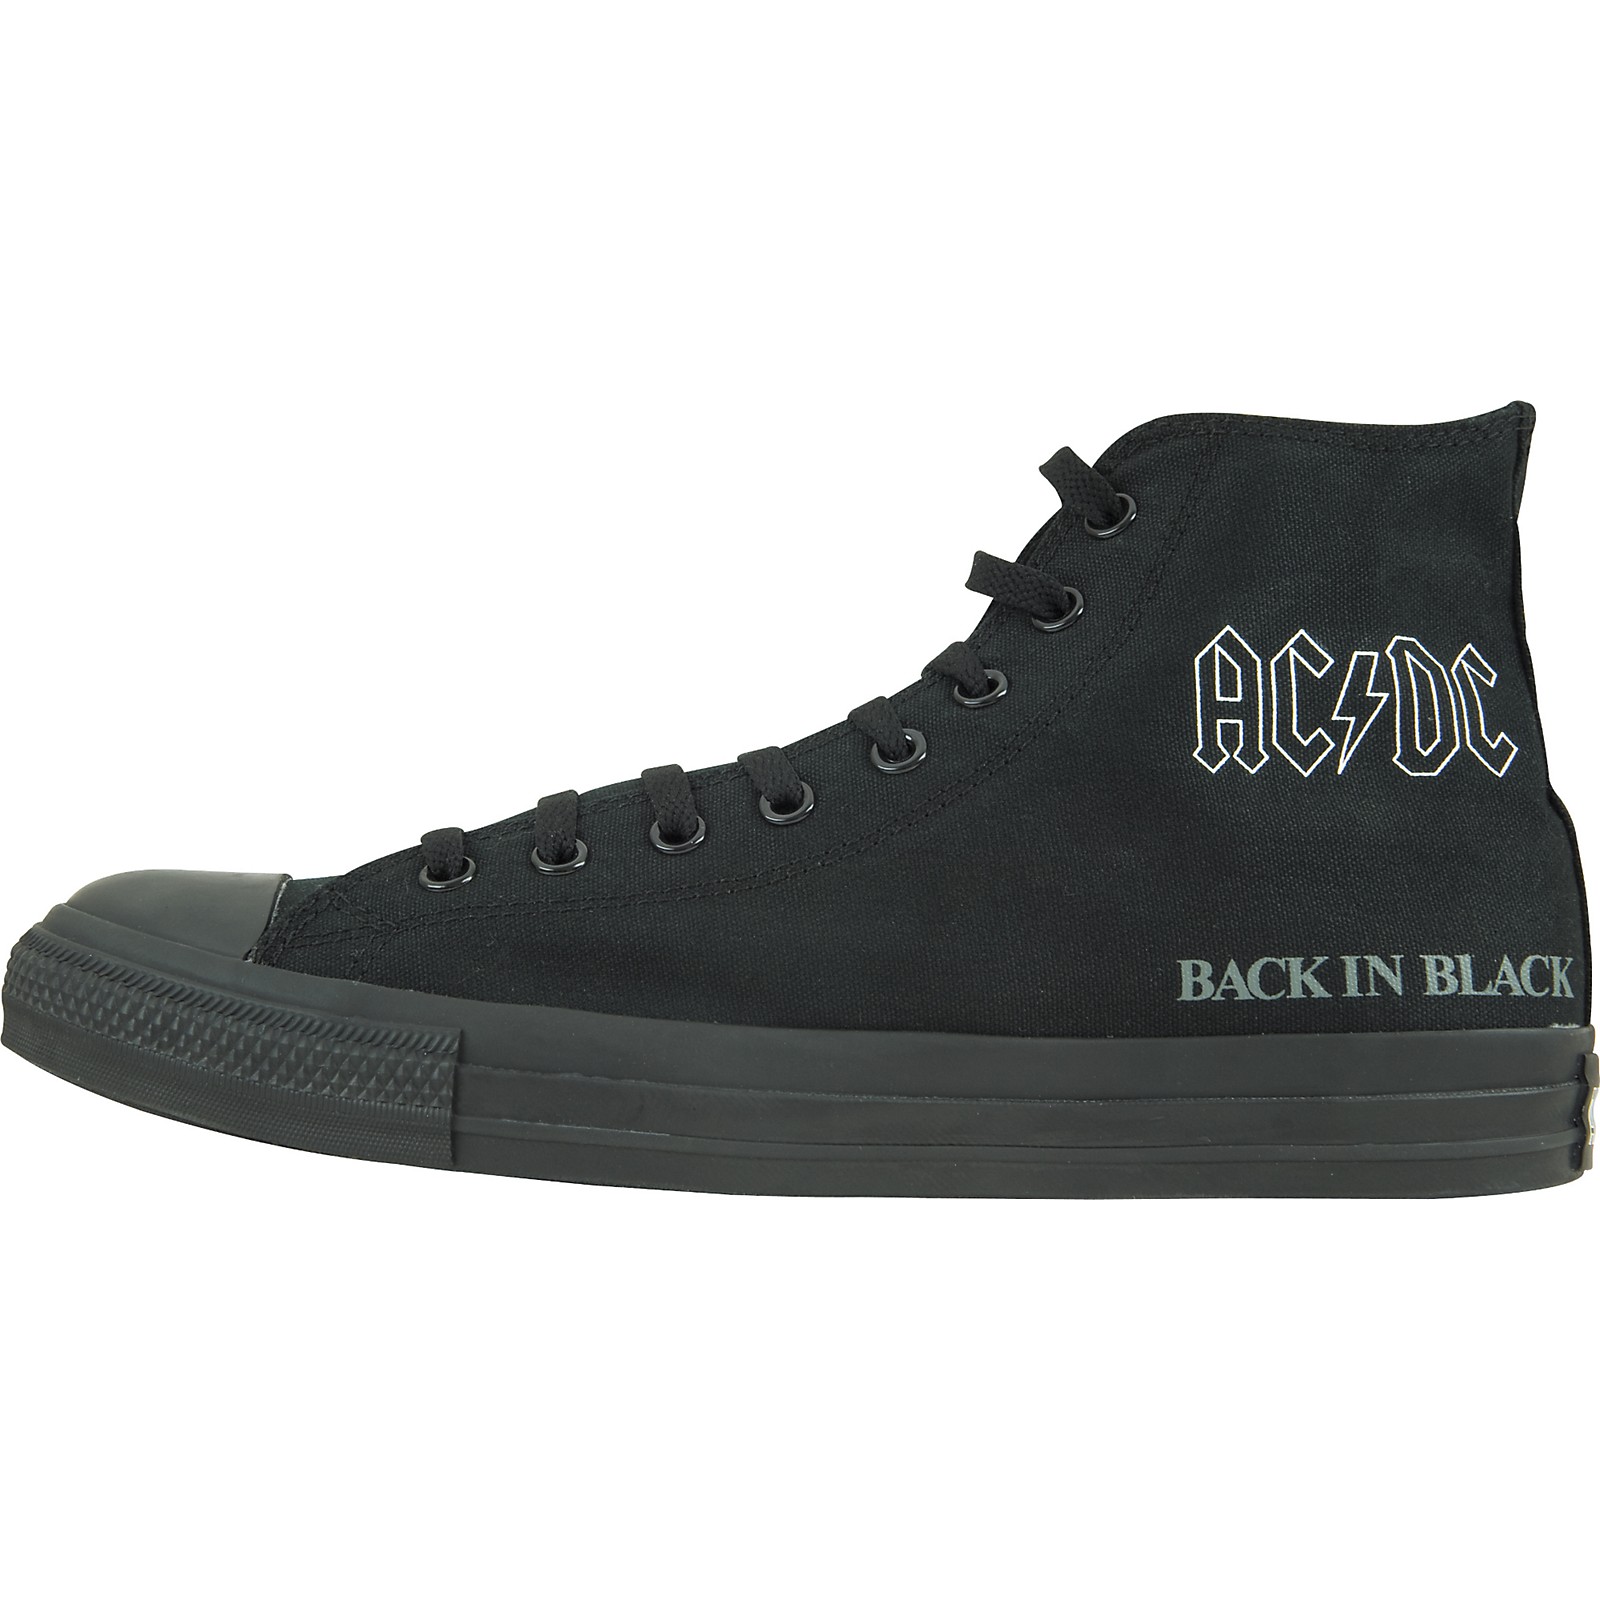 Top 53+ imagen converse acdc back in black